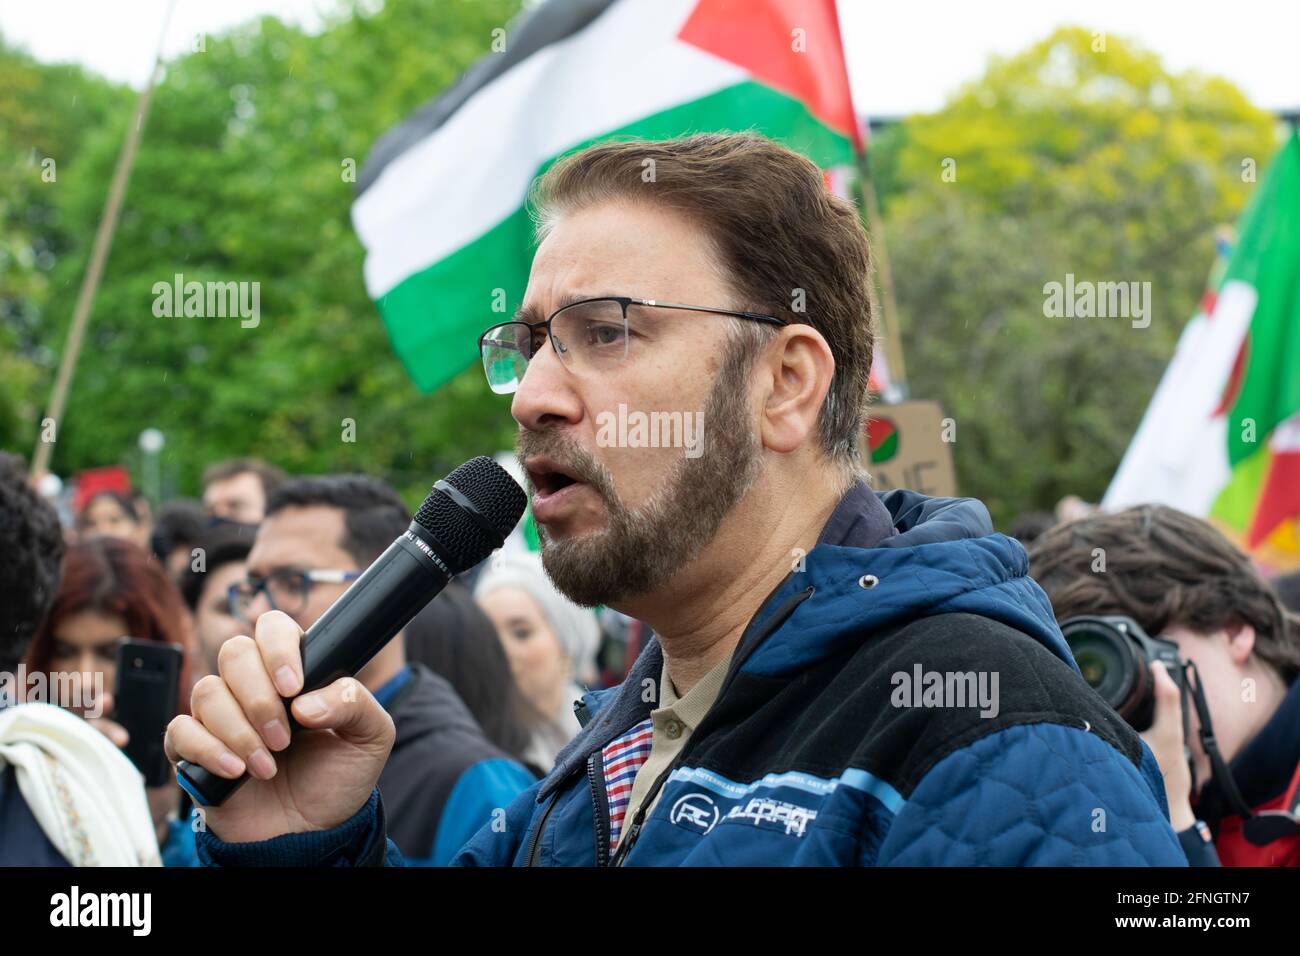 Afzal Khan Member of Parliament for Gorton speaking at Free Palestine rally in Platt Fields Park, Manchester, UK Stock Photo